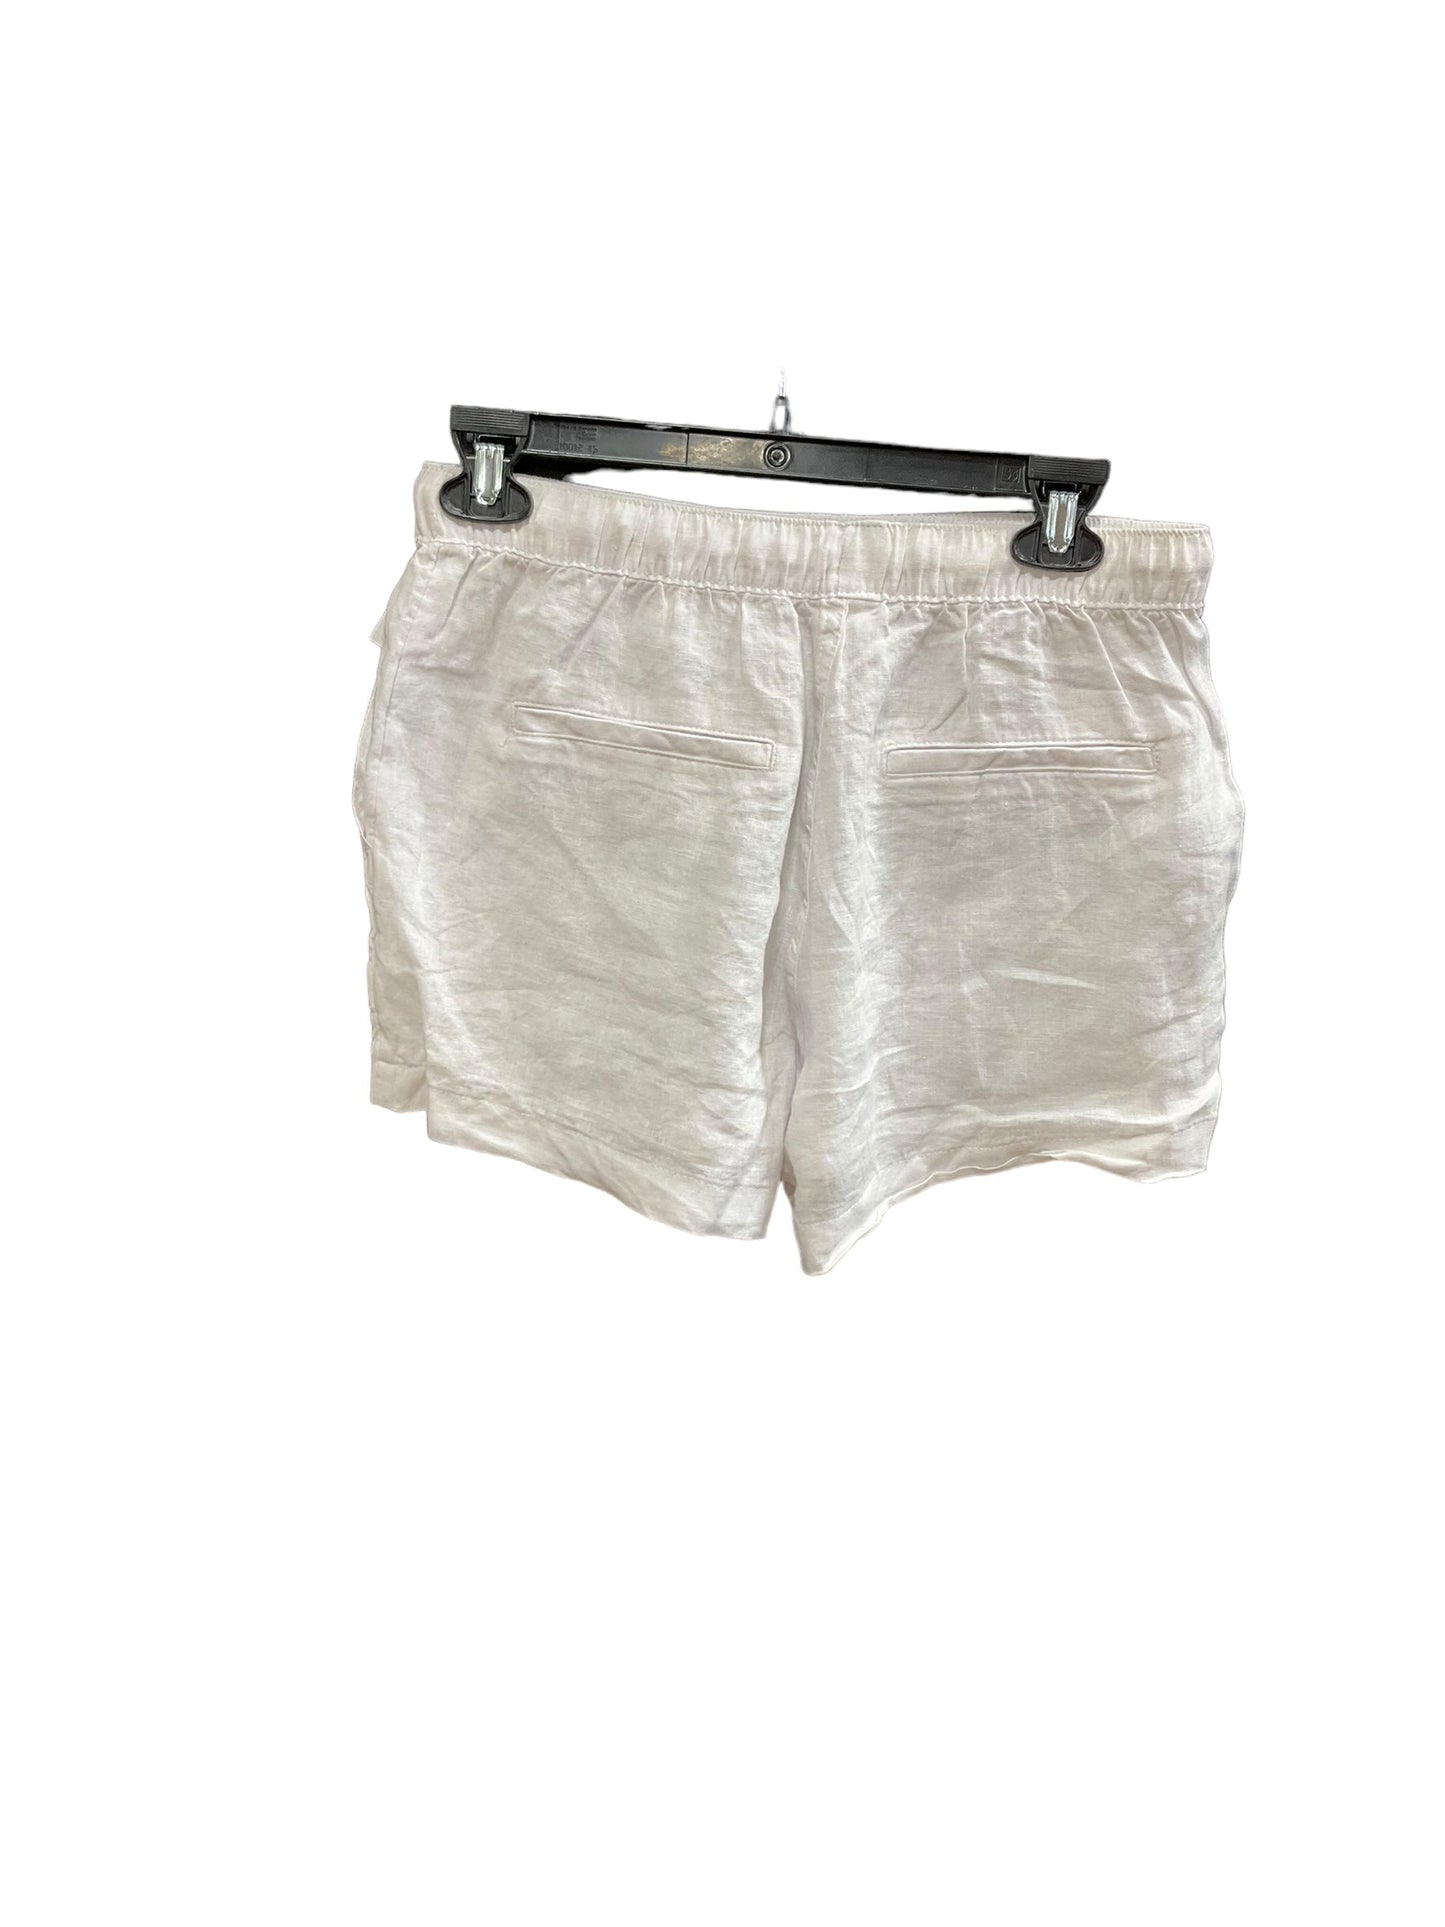 White Shorts C And C, Size L